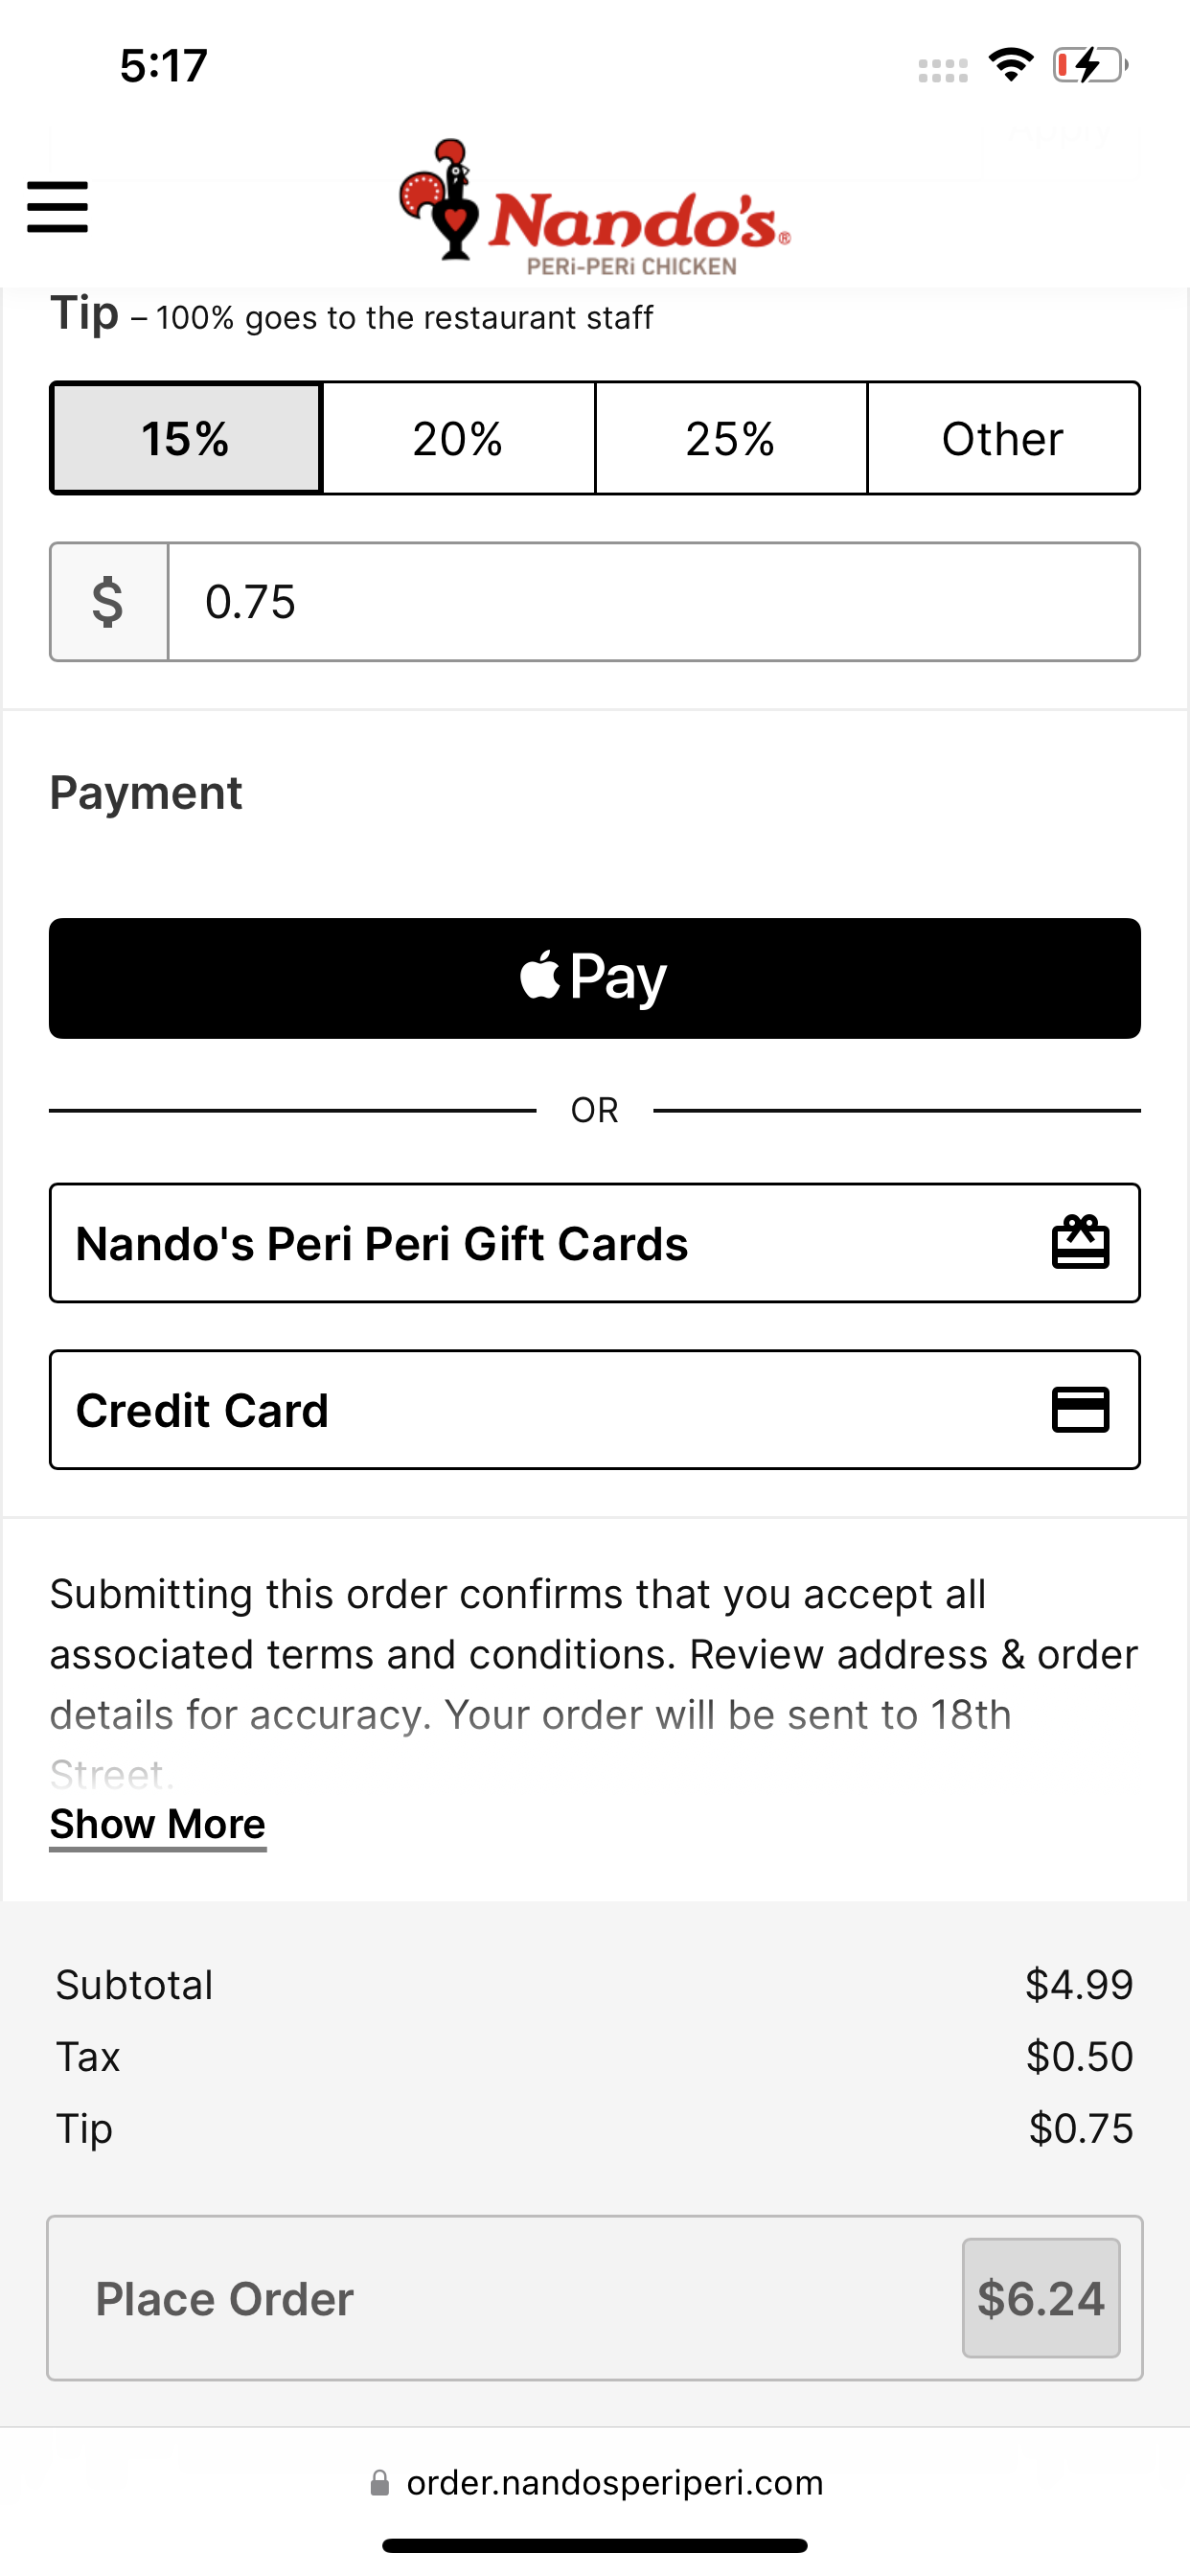 Nando's accepts Apple Pay on its website.